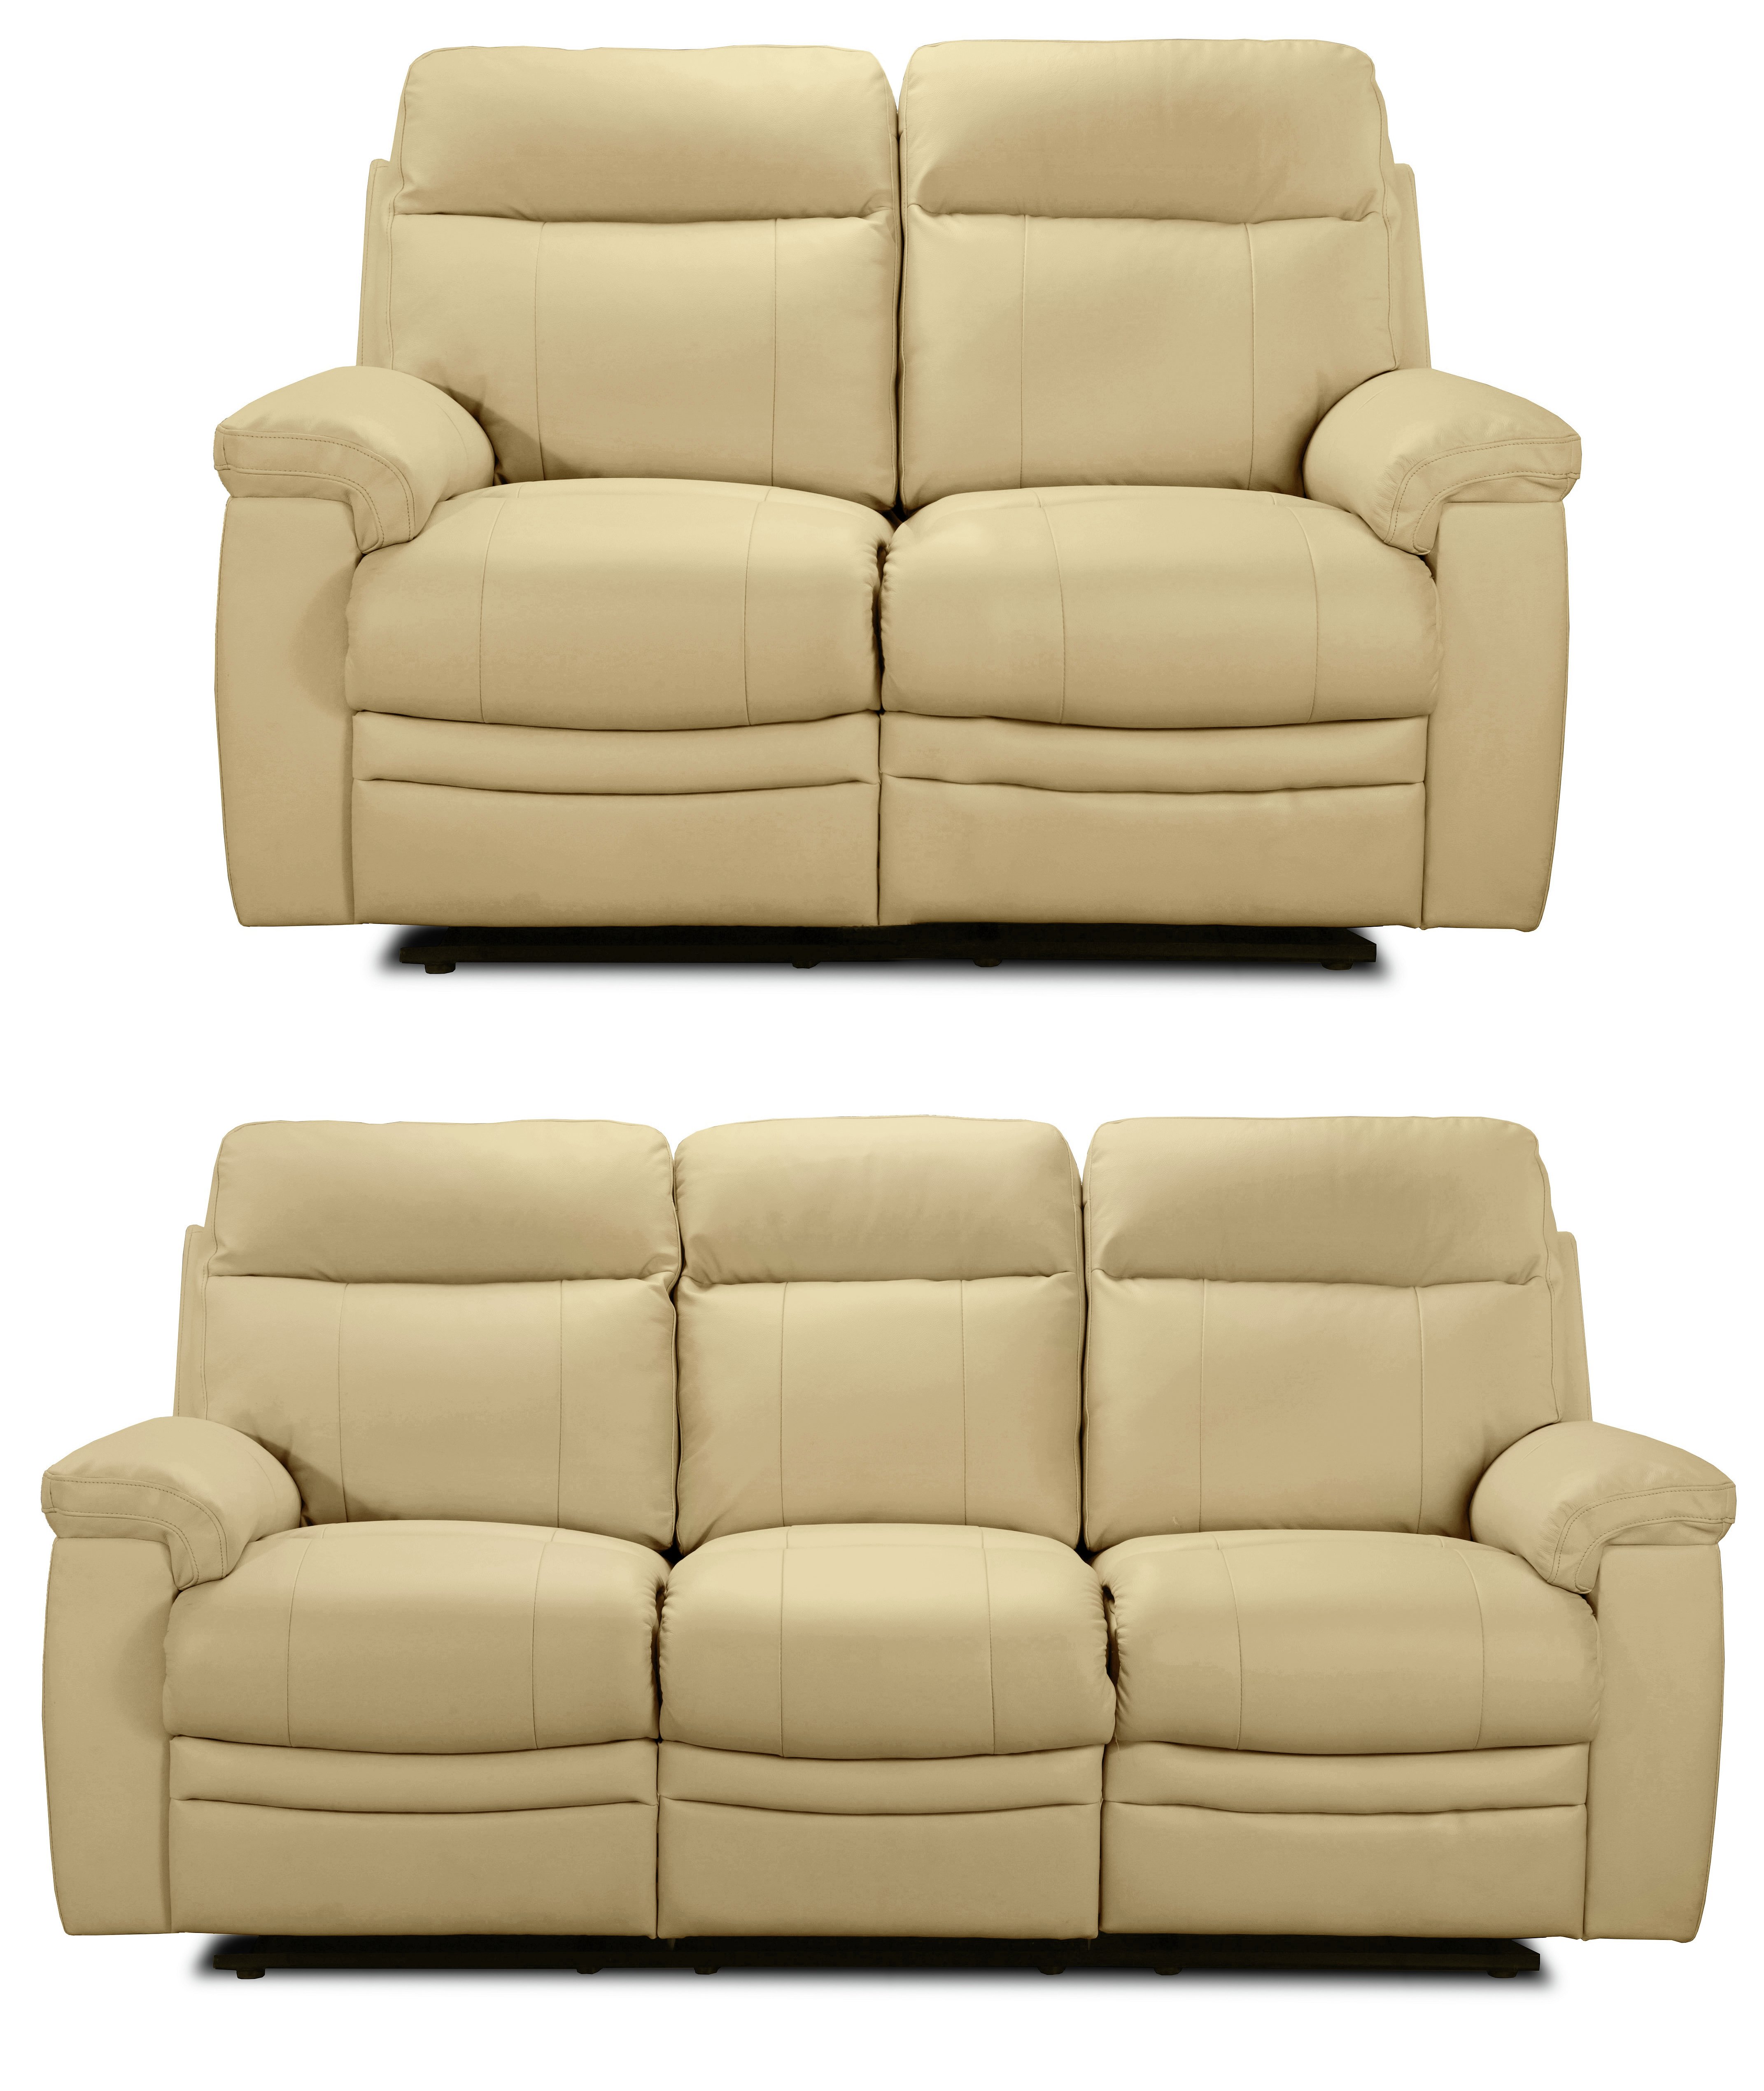 Argos Home Paolo 2 & 3 Seater Manual Recliner Sofas - Ivory